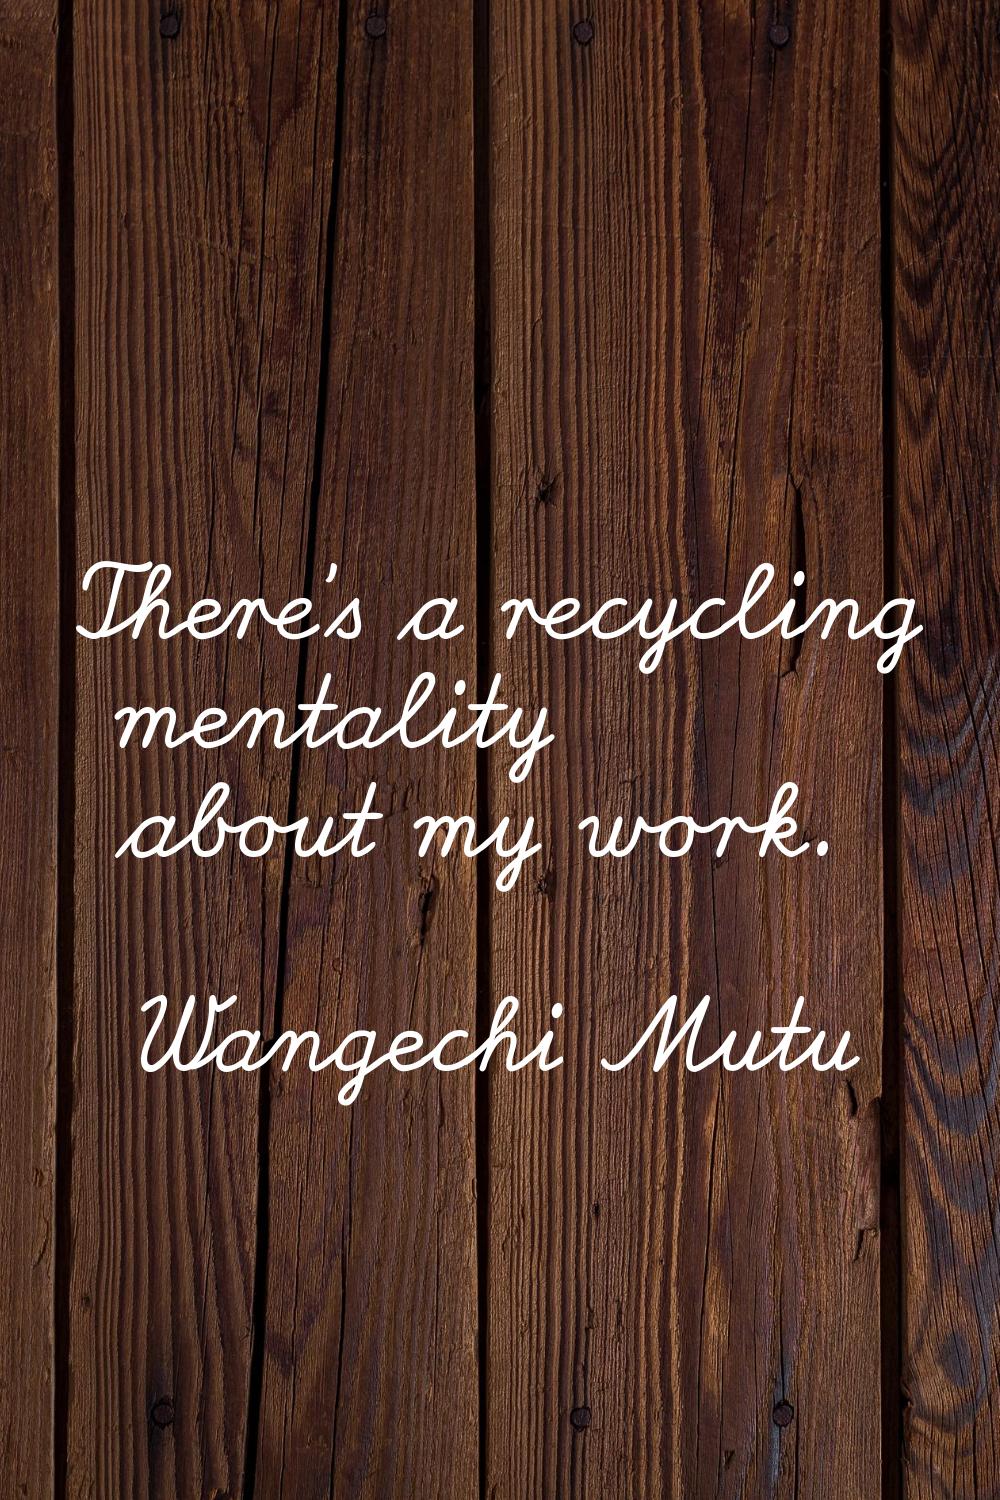 There's a recycling mentality about my work.